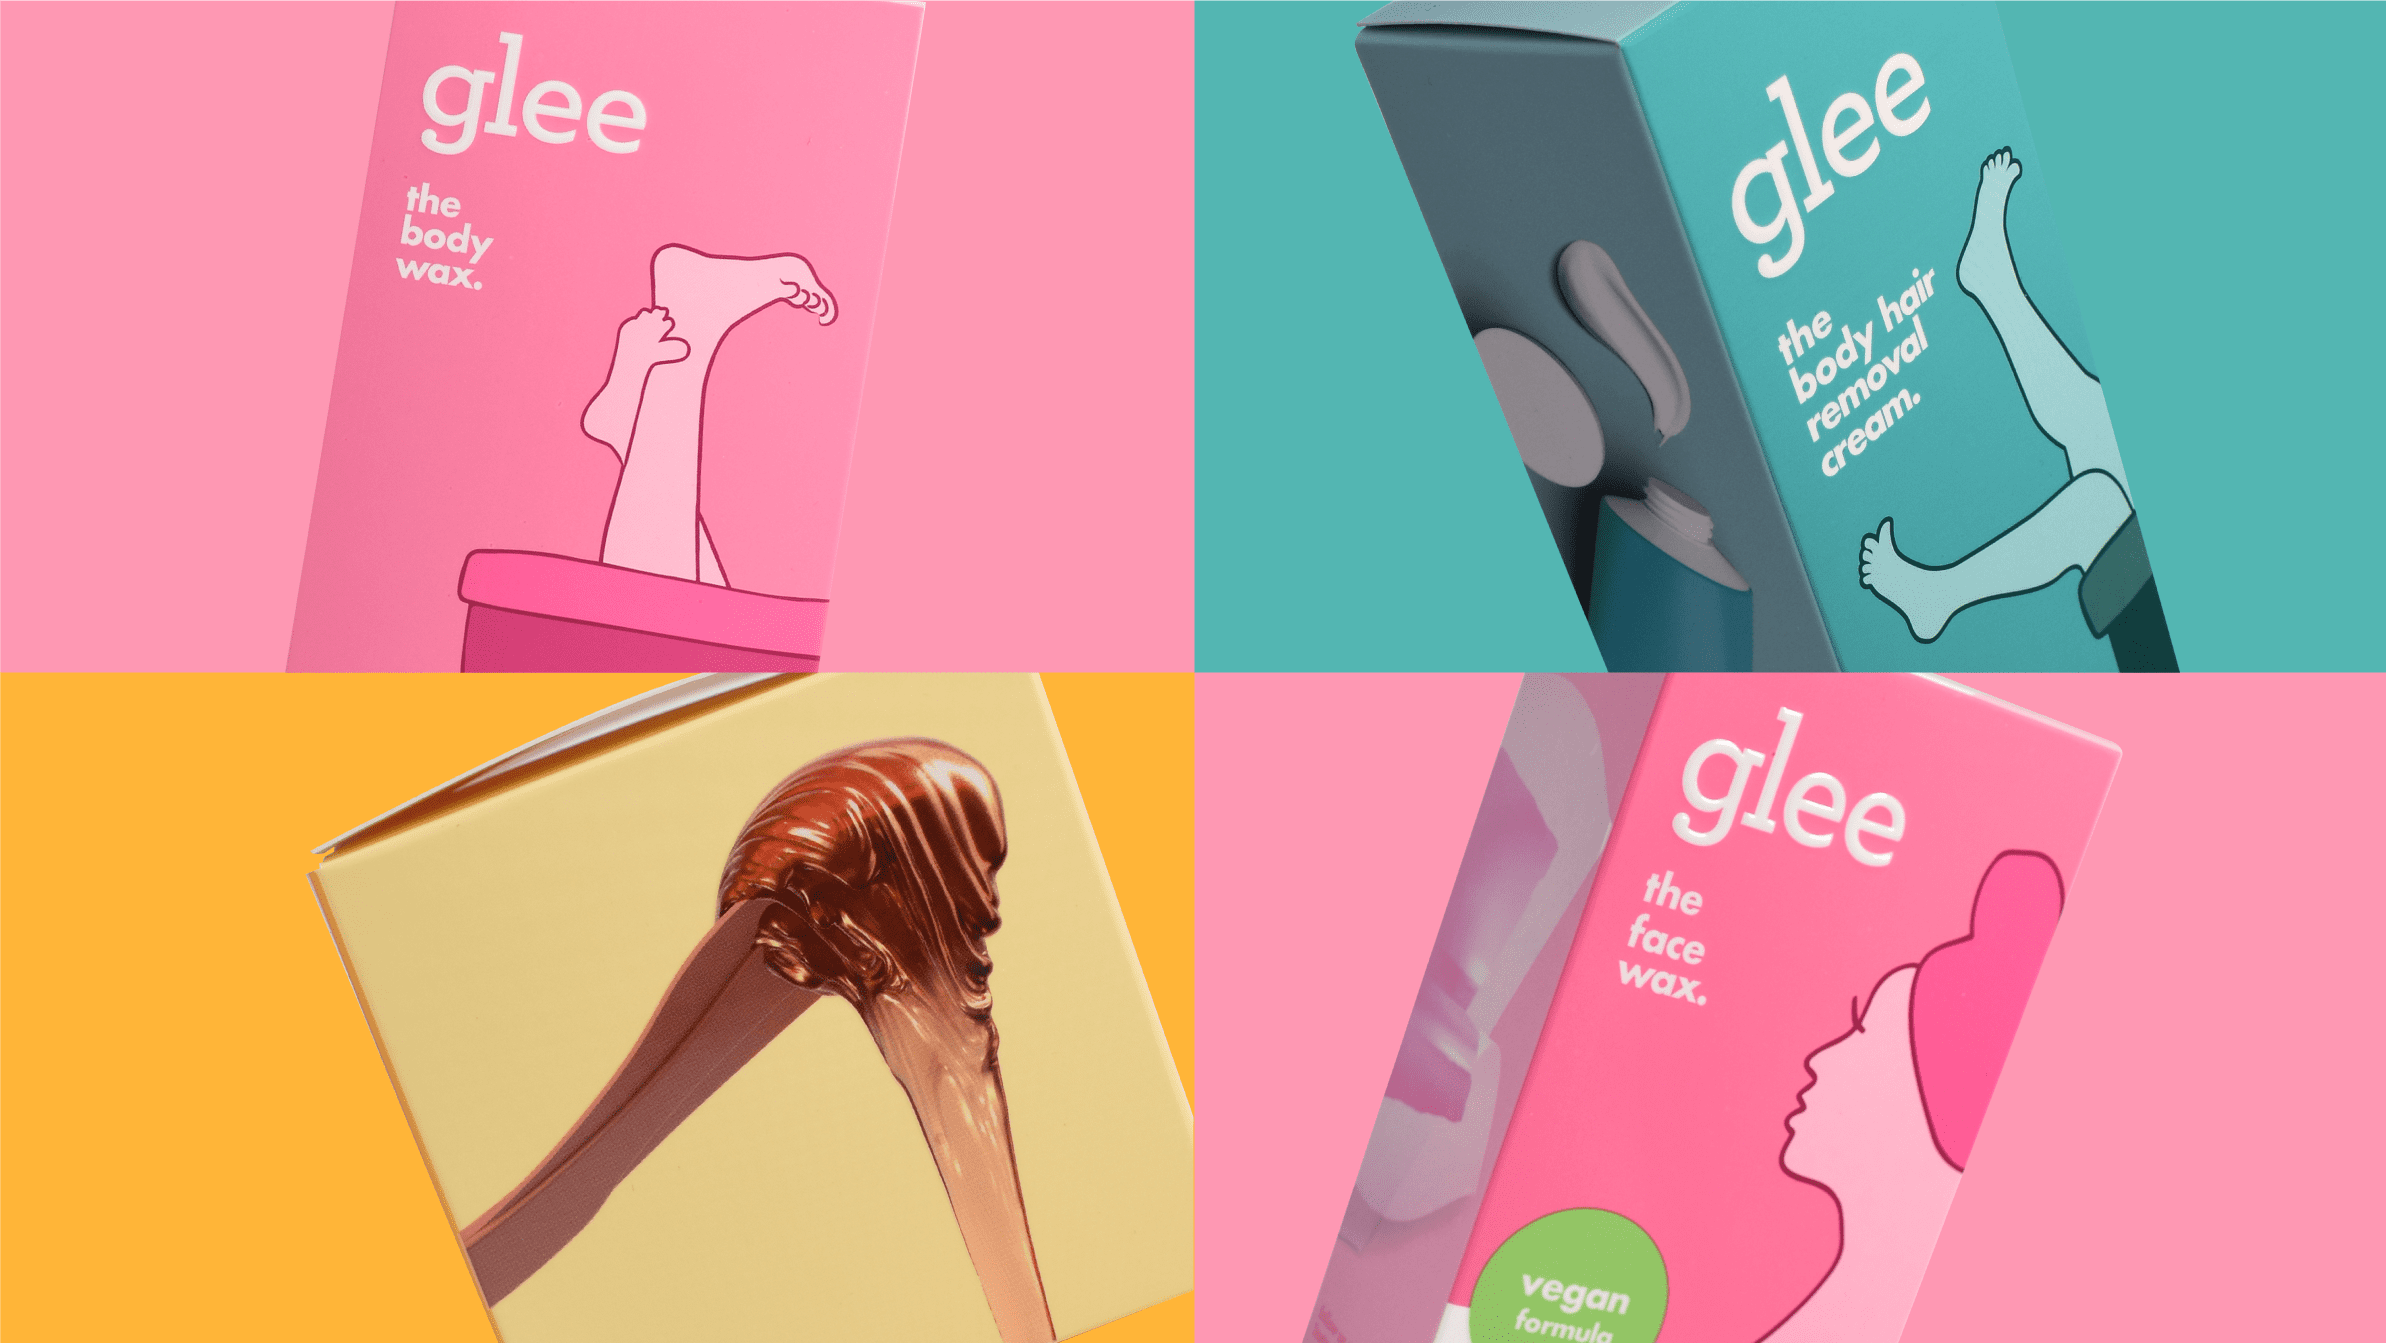 Collage of photographs of four different products from the Gillette Joy Glee razor and shaving wax line, showcasing packaging design services for consumer packaged goods.